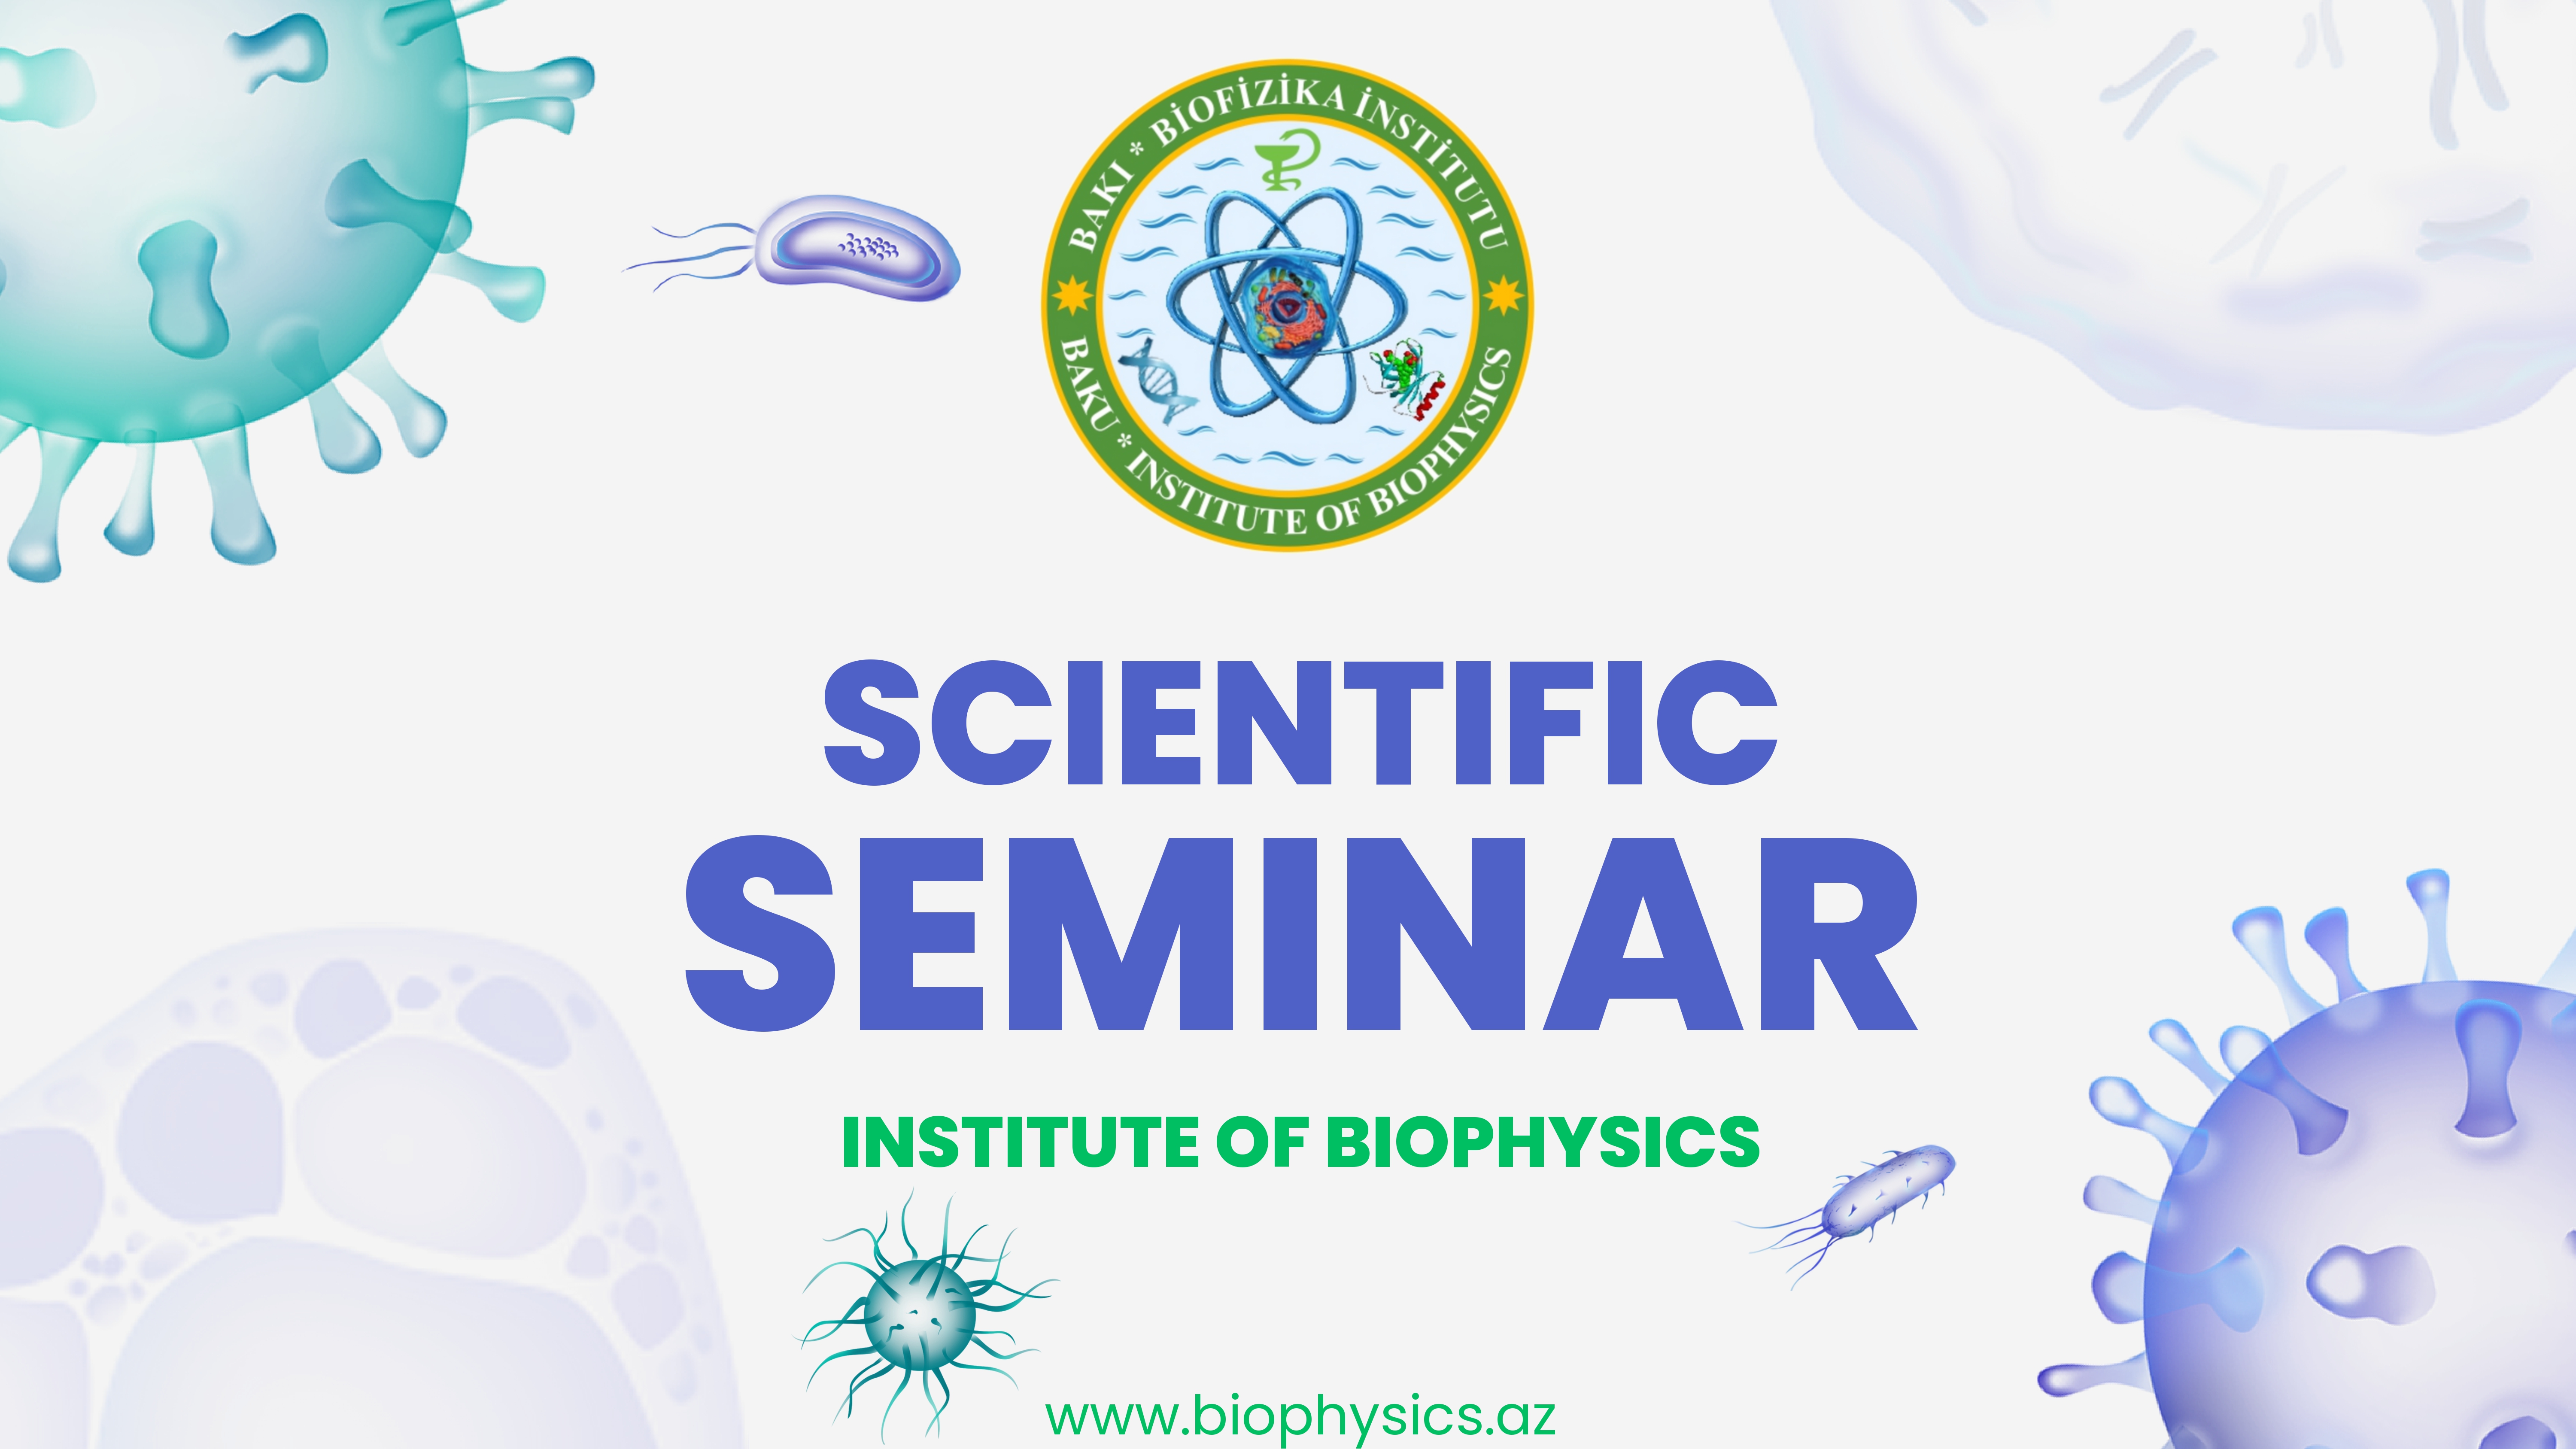 A scientific seminar on "Non-coding driver mutations of cancer" will be held at the Institute of Biophysics